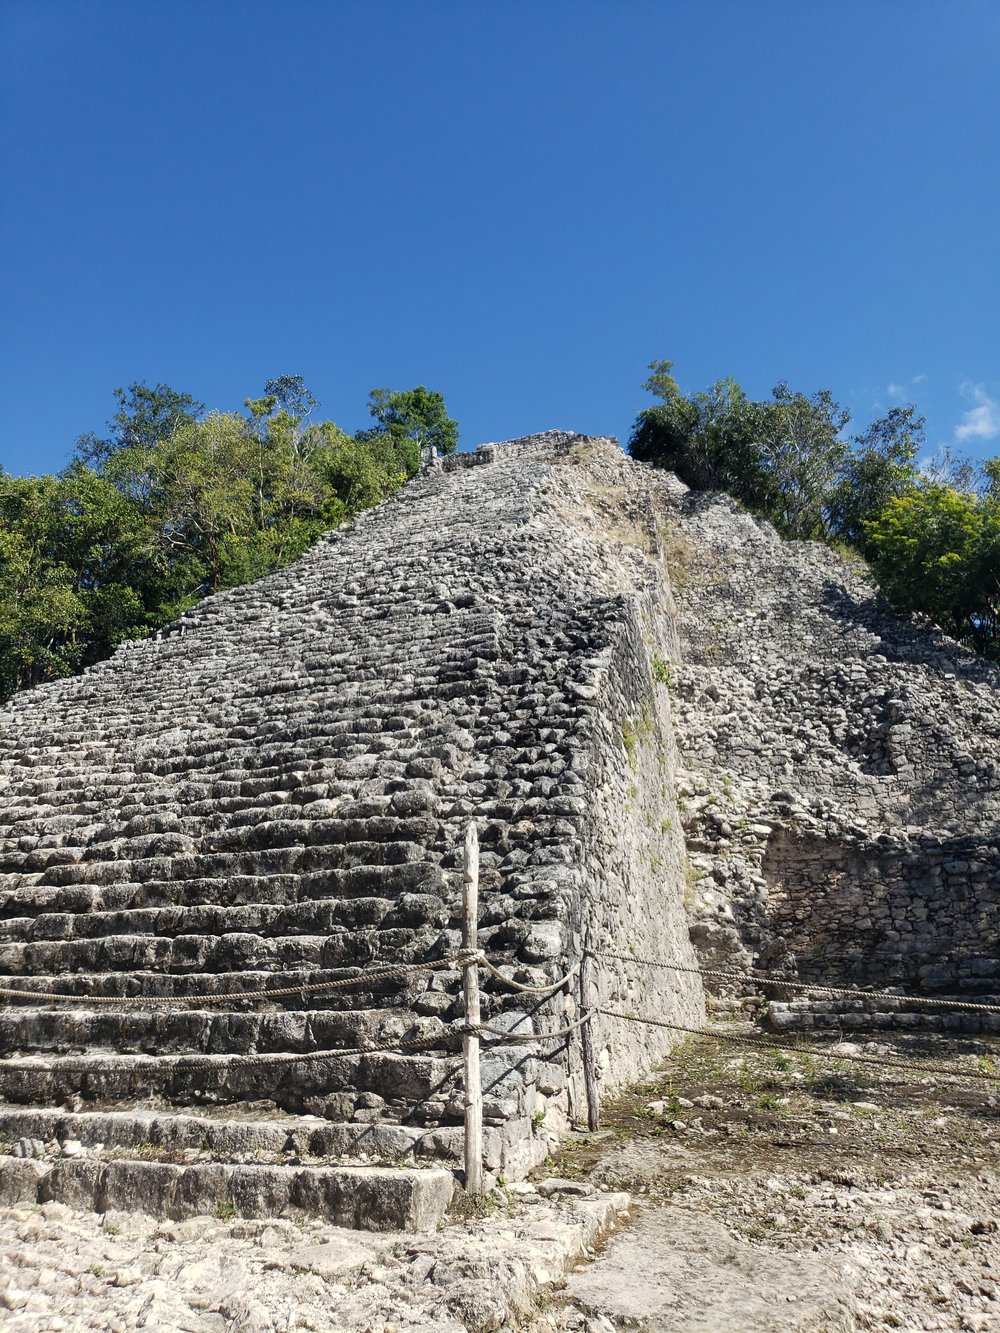 Mayan Pyramid of the Classic Period